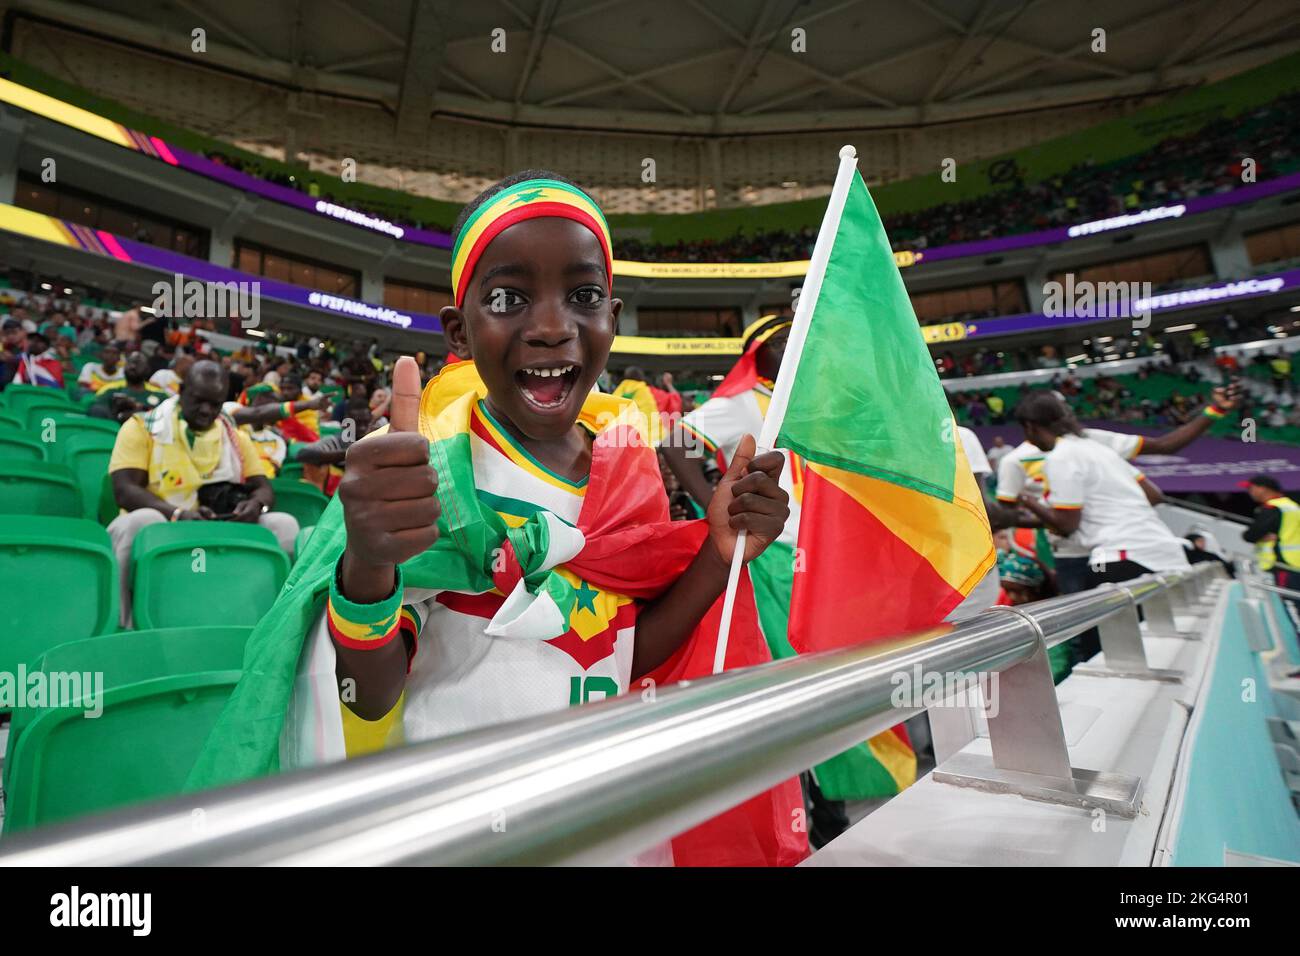 Doha, Qatar. 21st Nov, 2022. DOHA, QATAR - NOVEMBER 21: Young kid of Senegal celebrates before the FIFA World Cup Qatar 2022 group A match between Senegal and Netherlands at Al Thumama Stadium on November 21, 2022 in Doha, Qatar. (Photo by Florencia Tan Jun/PxImages) Credit: Px Images/Alamy Live News Stock Photo